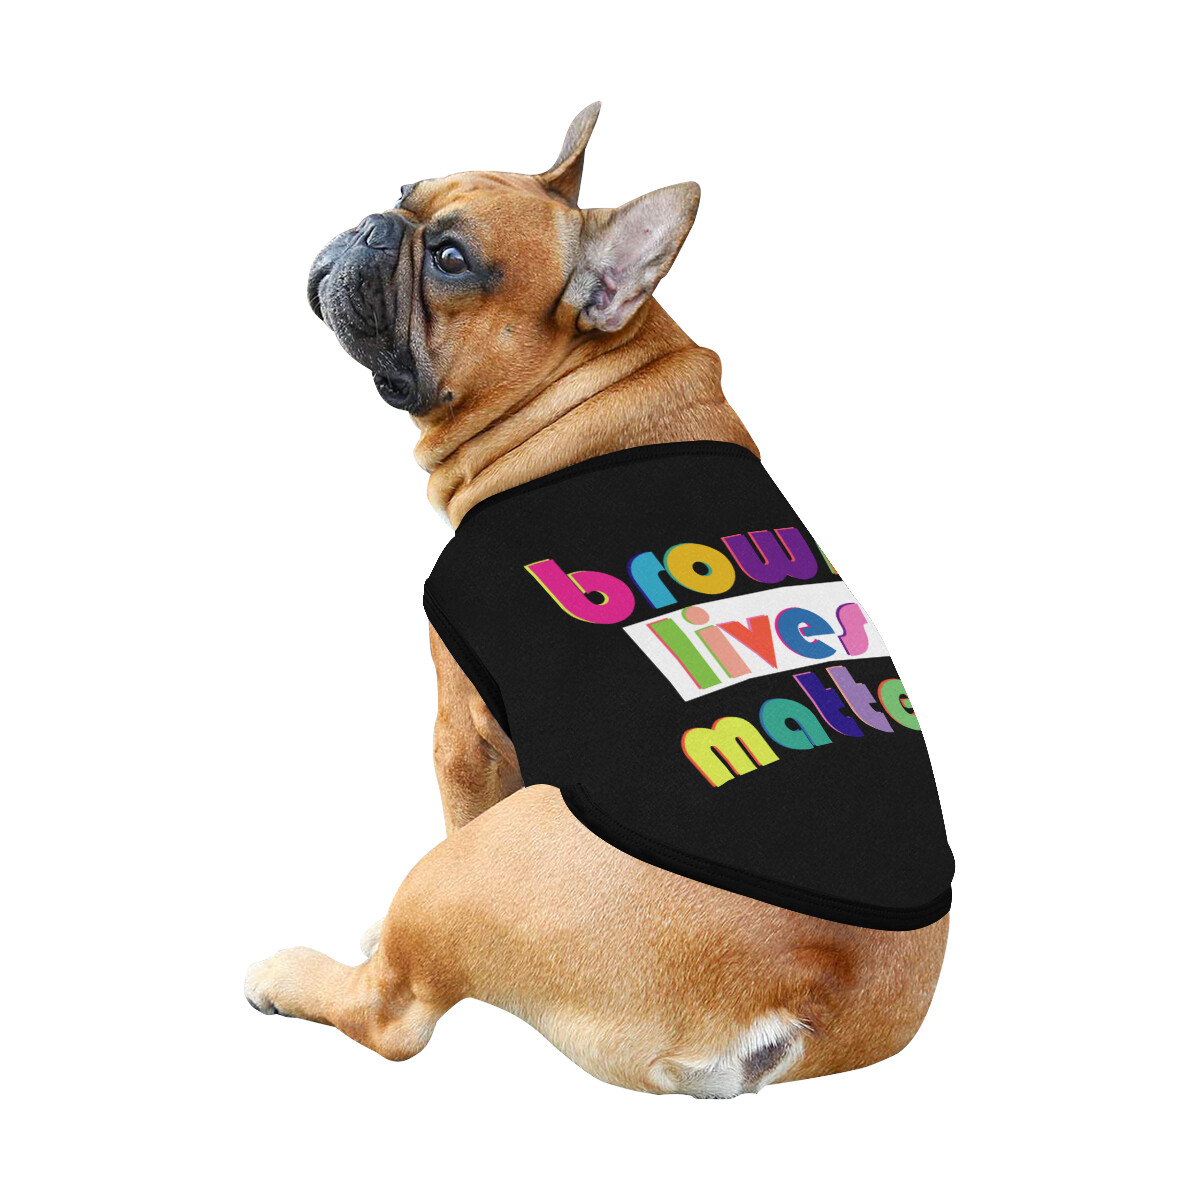 🐕 Brown lives Matter Dog Tank Top, Dog shirt, Dog clothes, Gifts, front back print, 7 sizes XS to 3XL black